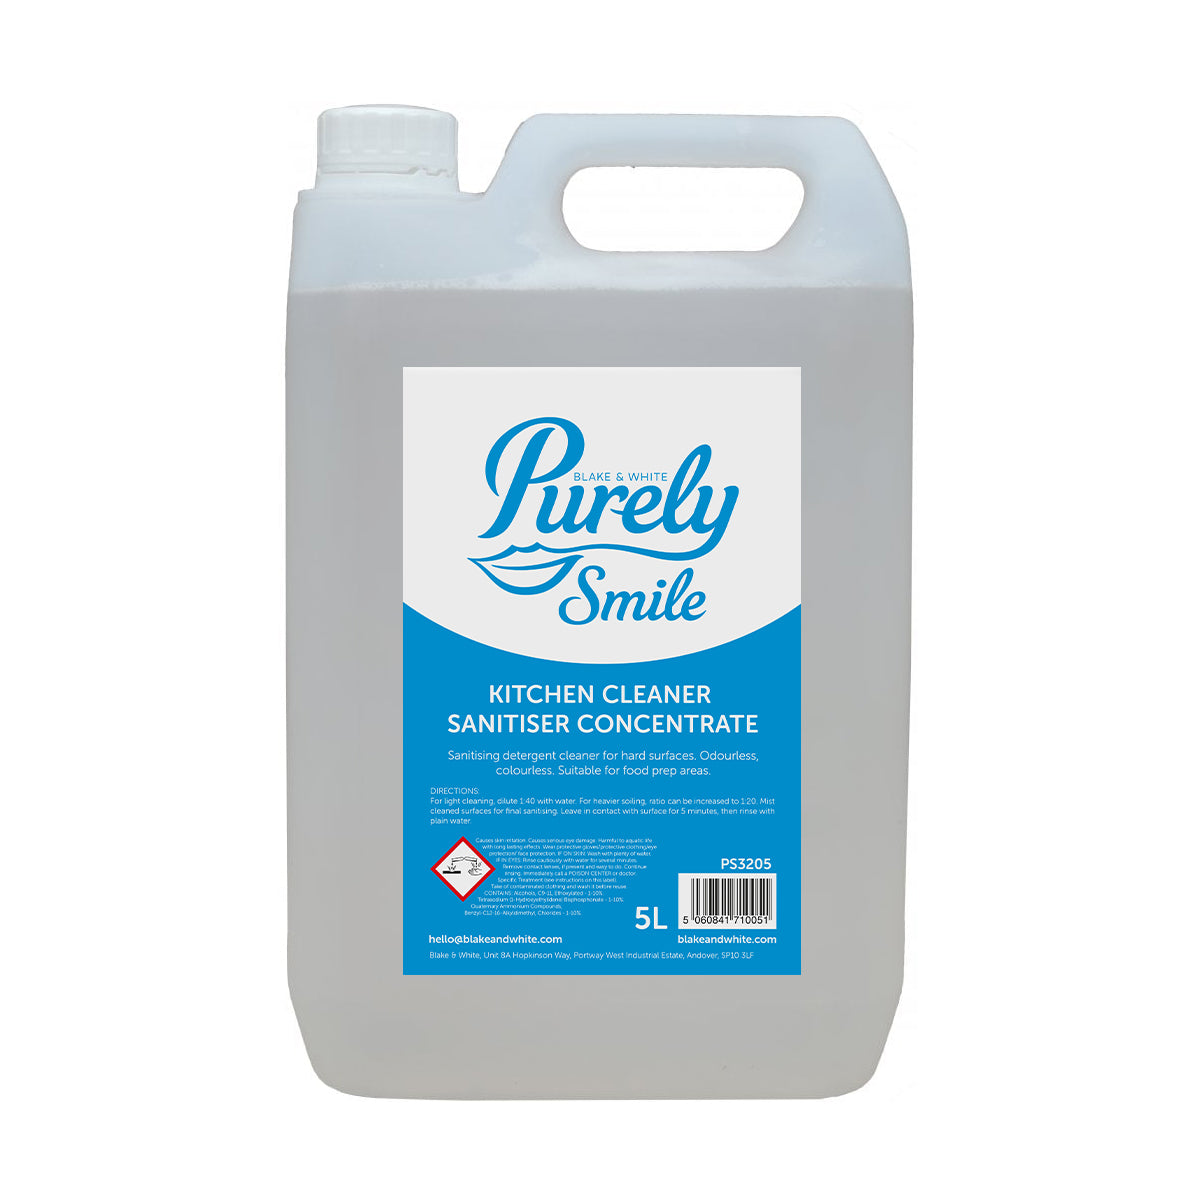 Purely Smile Kitchen Cleaner Sanitiser 5L Concentrate